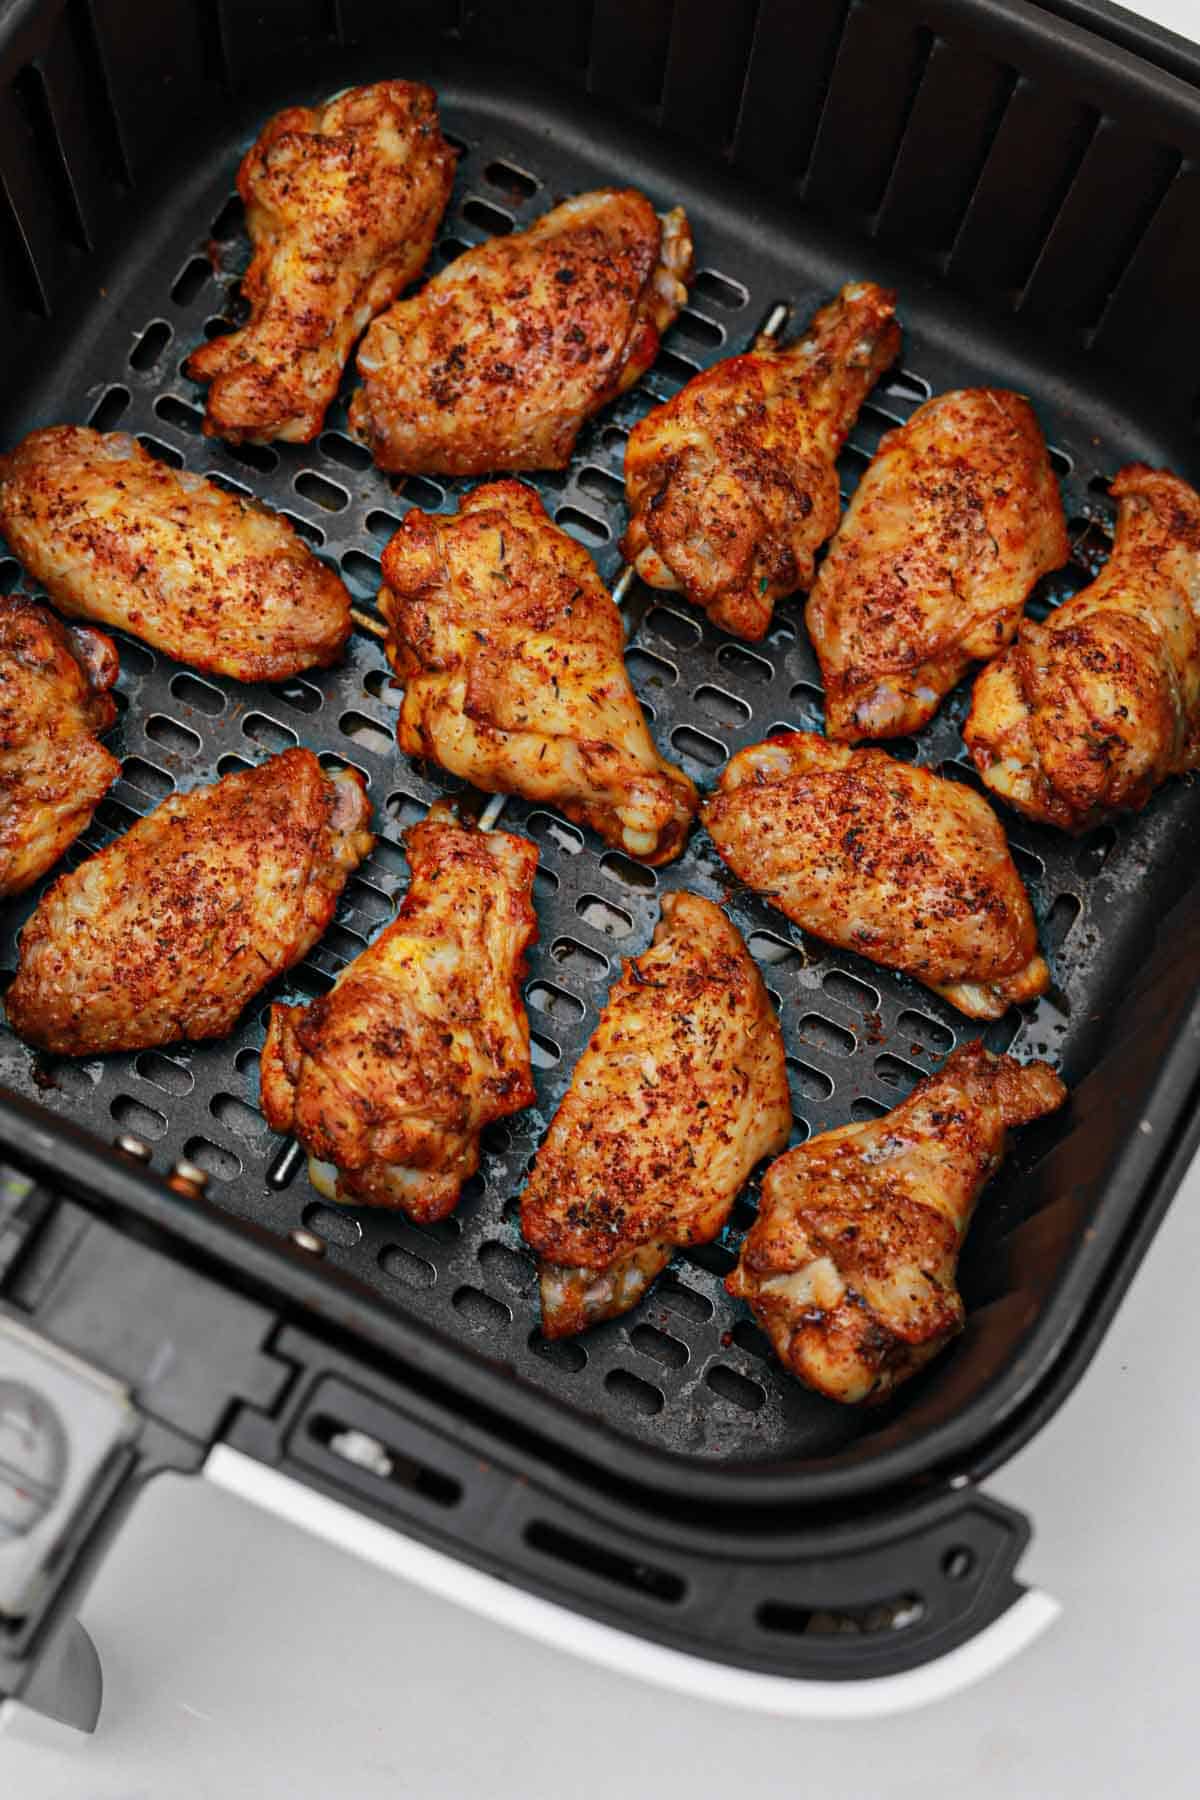 Cooked chicken wings in air fryer shown in the air fryer.